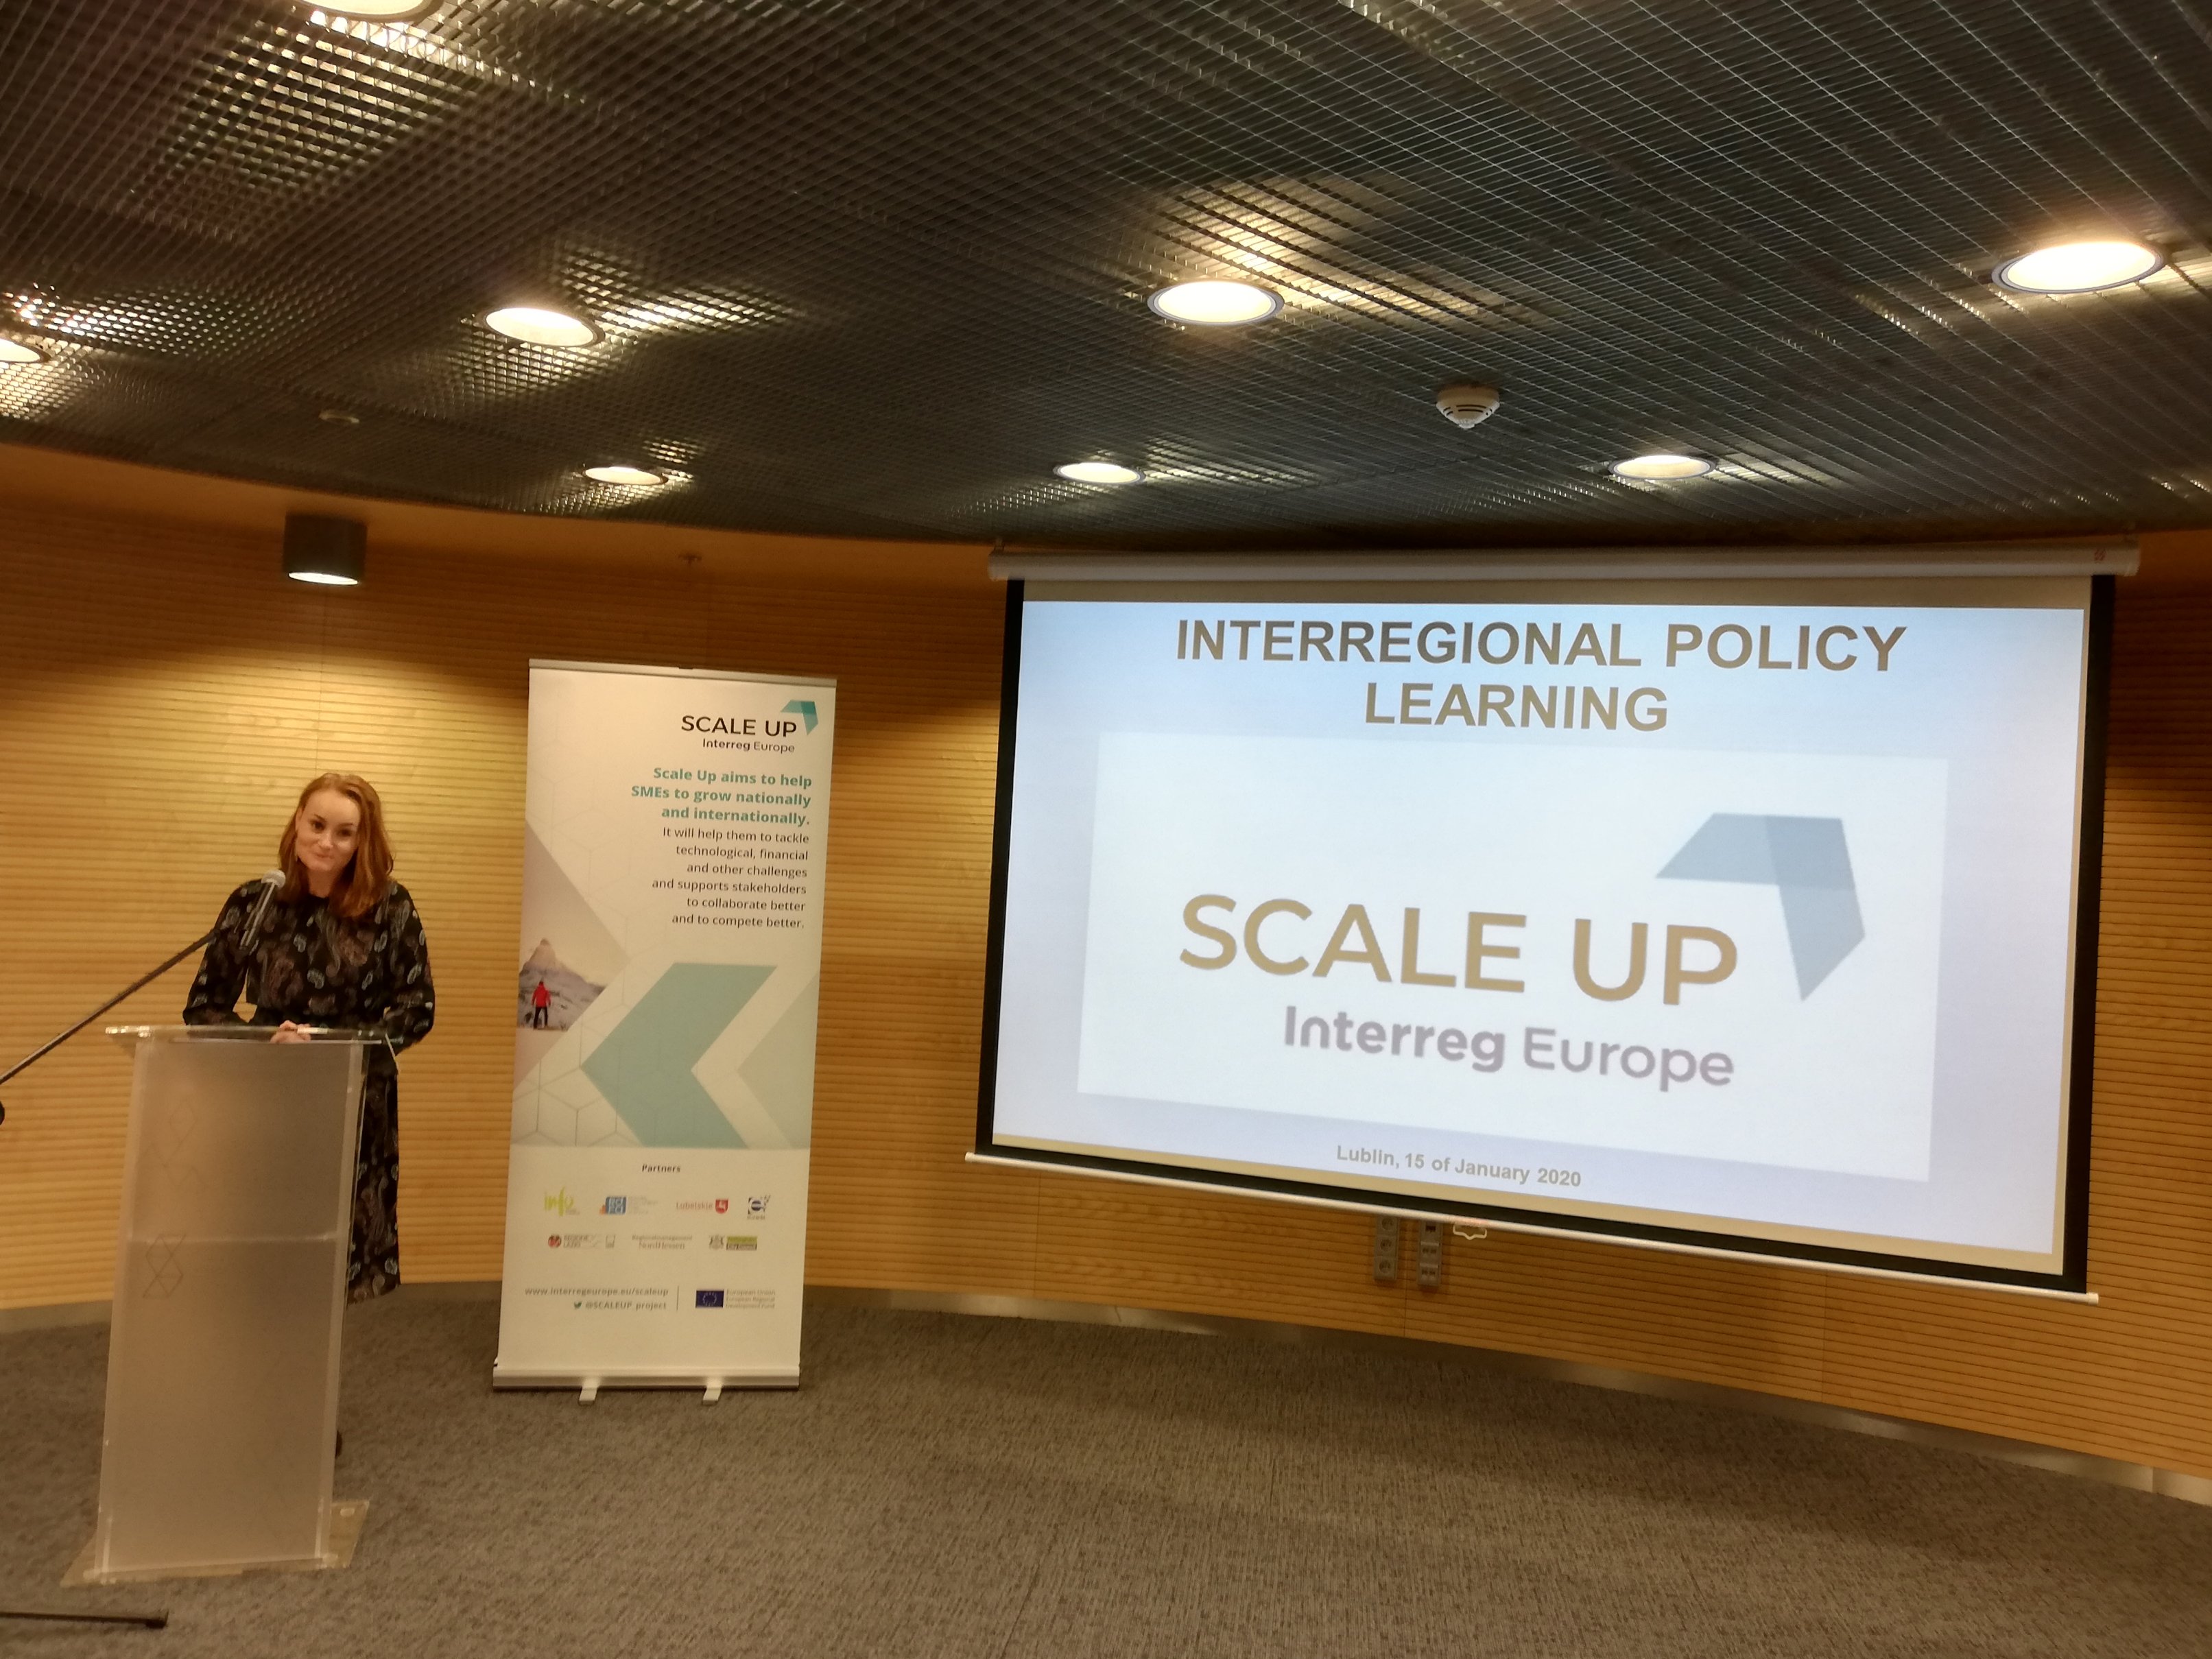 First Interregional Policy Learning event